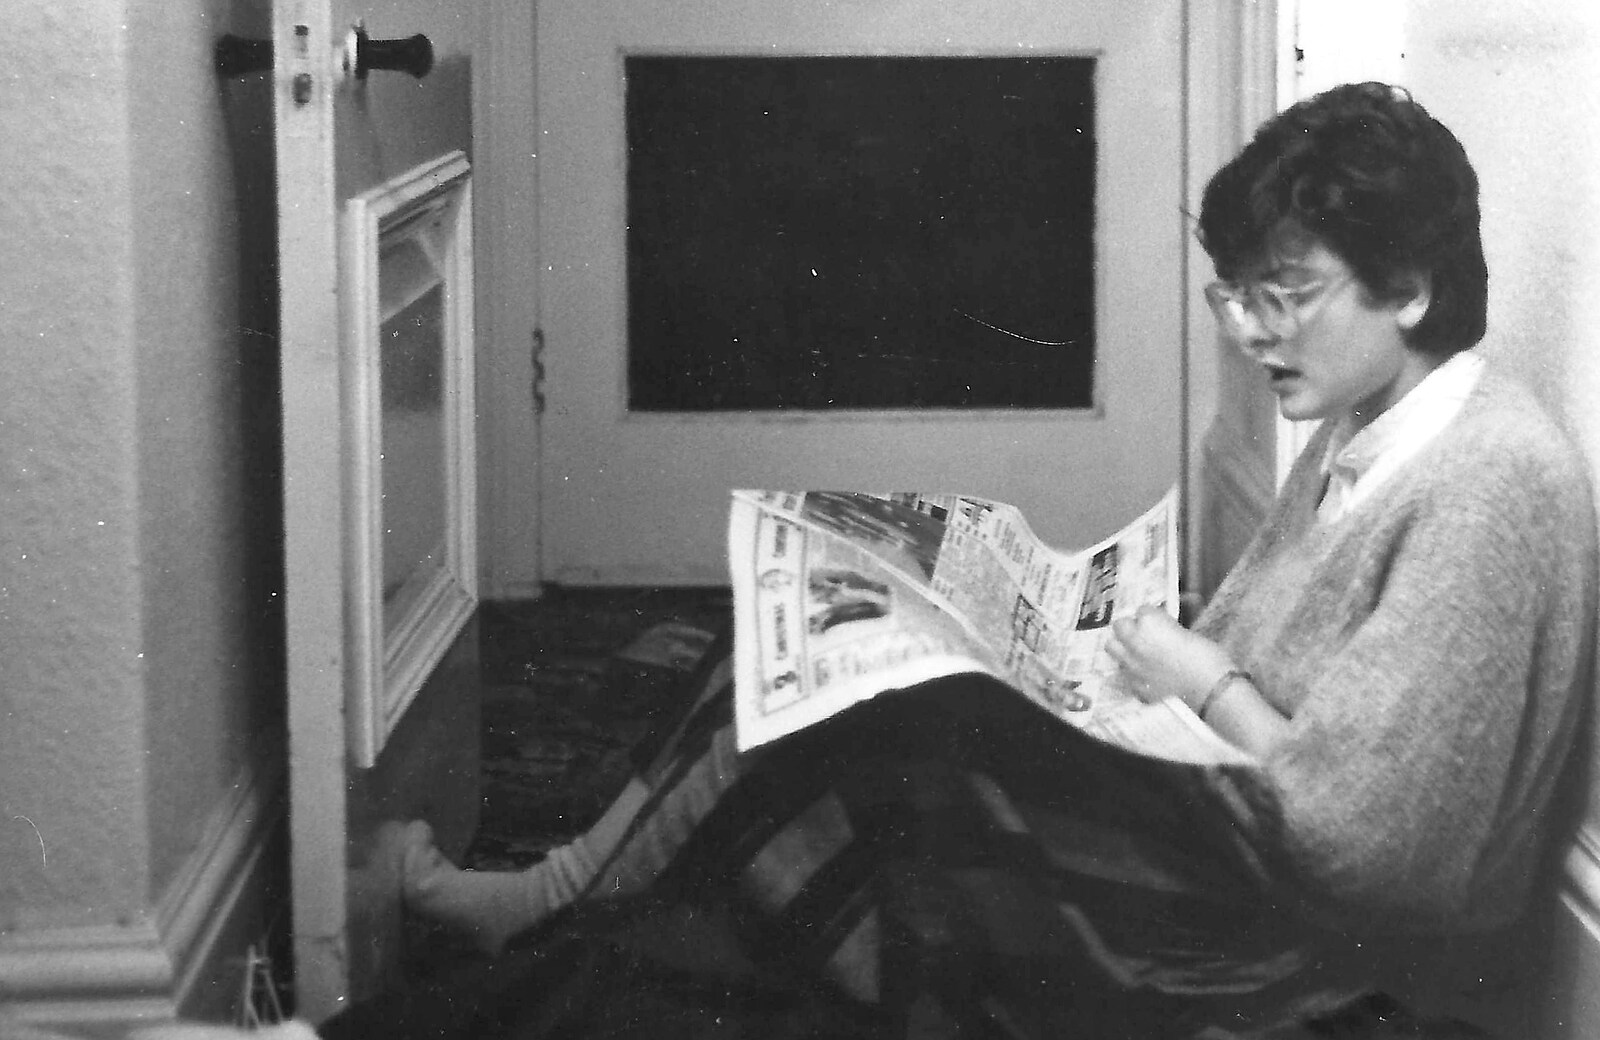 Barbara reads the newspaper in the hall from Uni: The First Year in Black and White, Plymouth Polytechnic, Devon - 8th April 1986